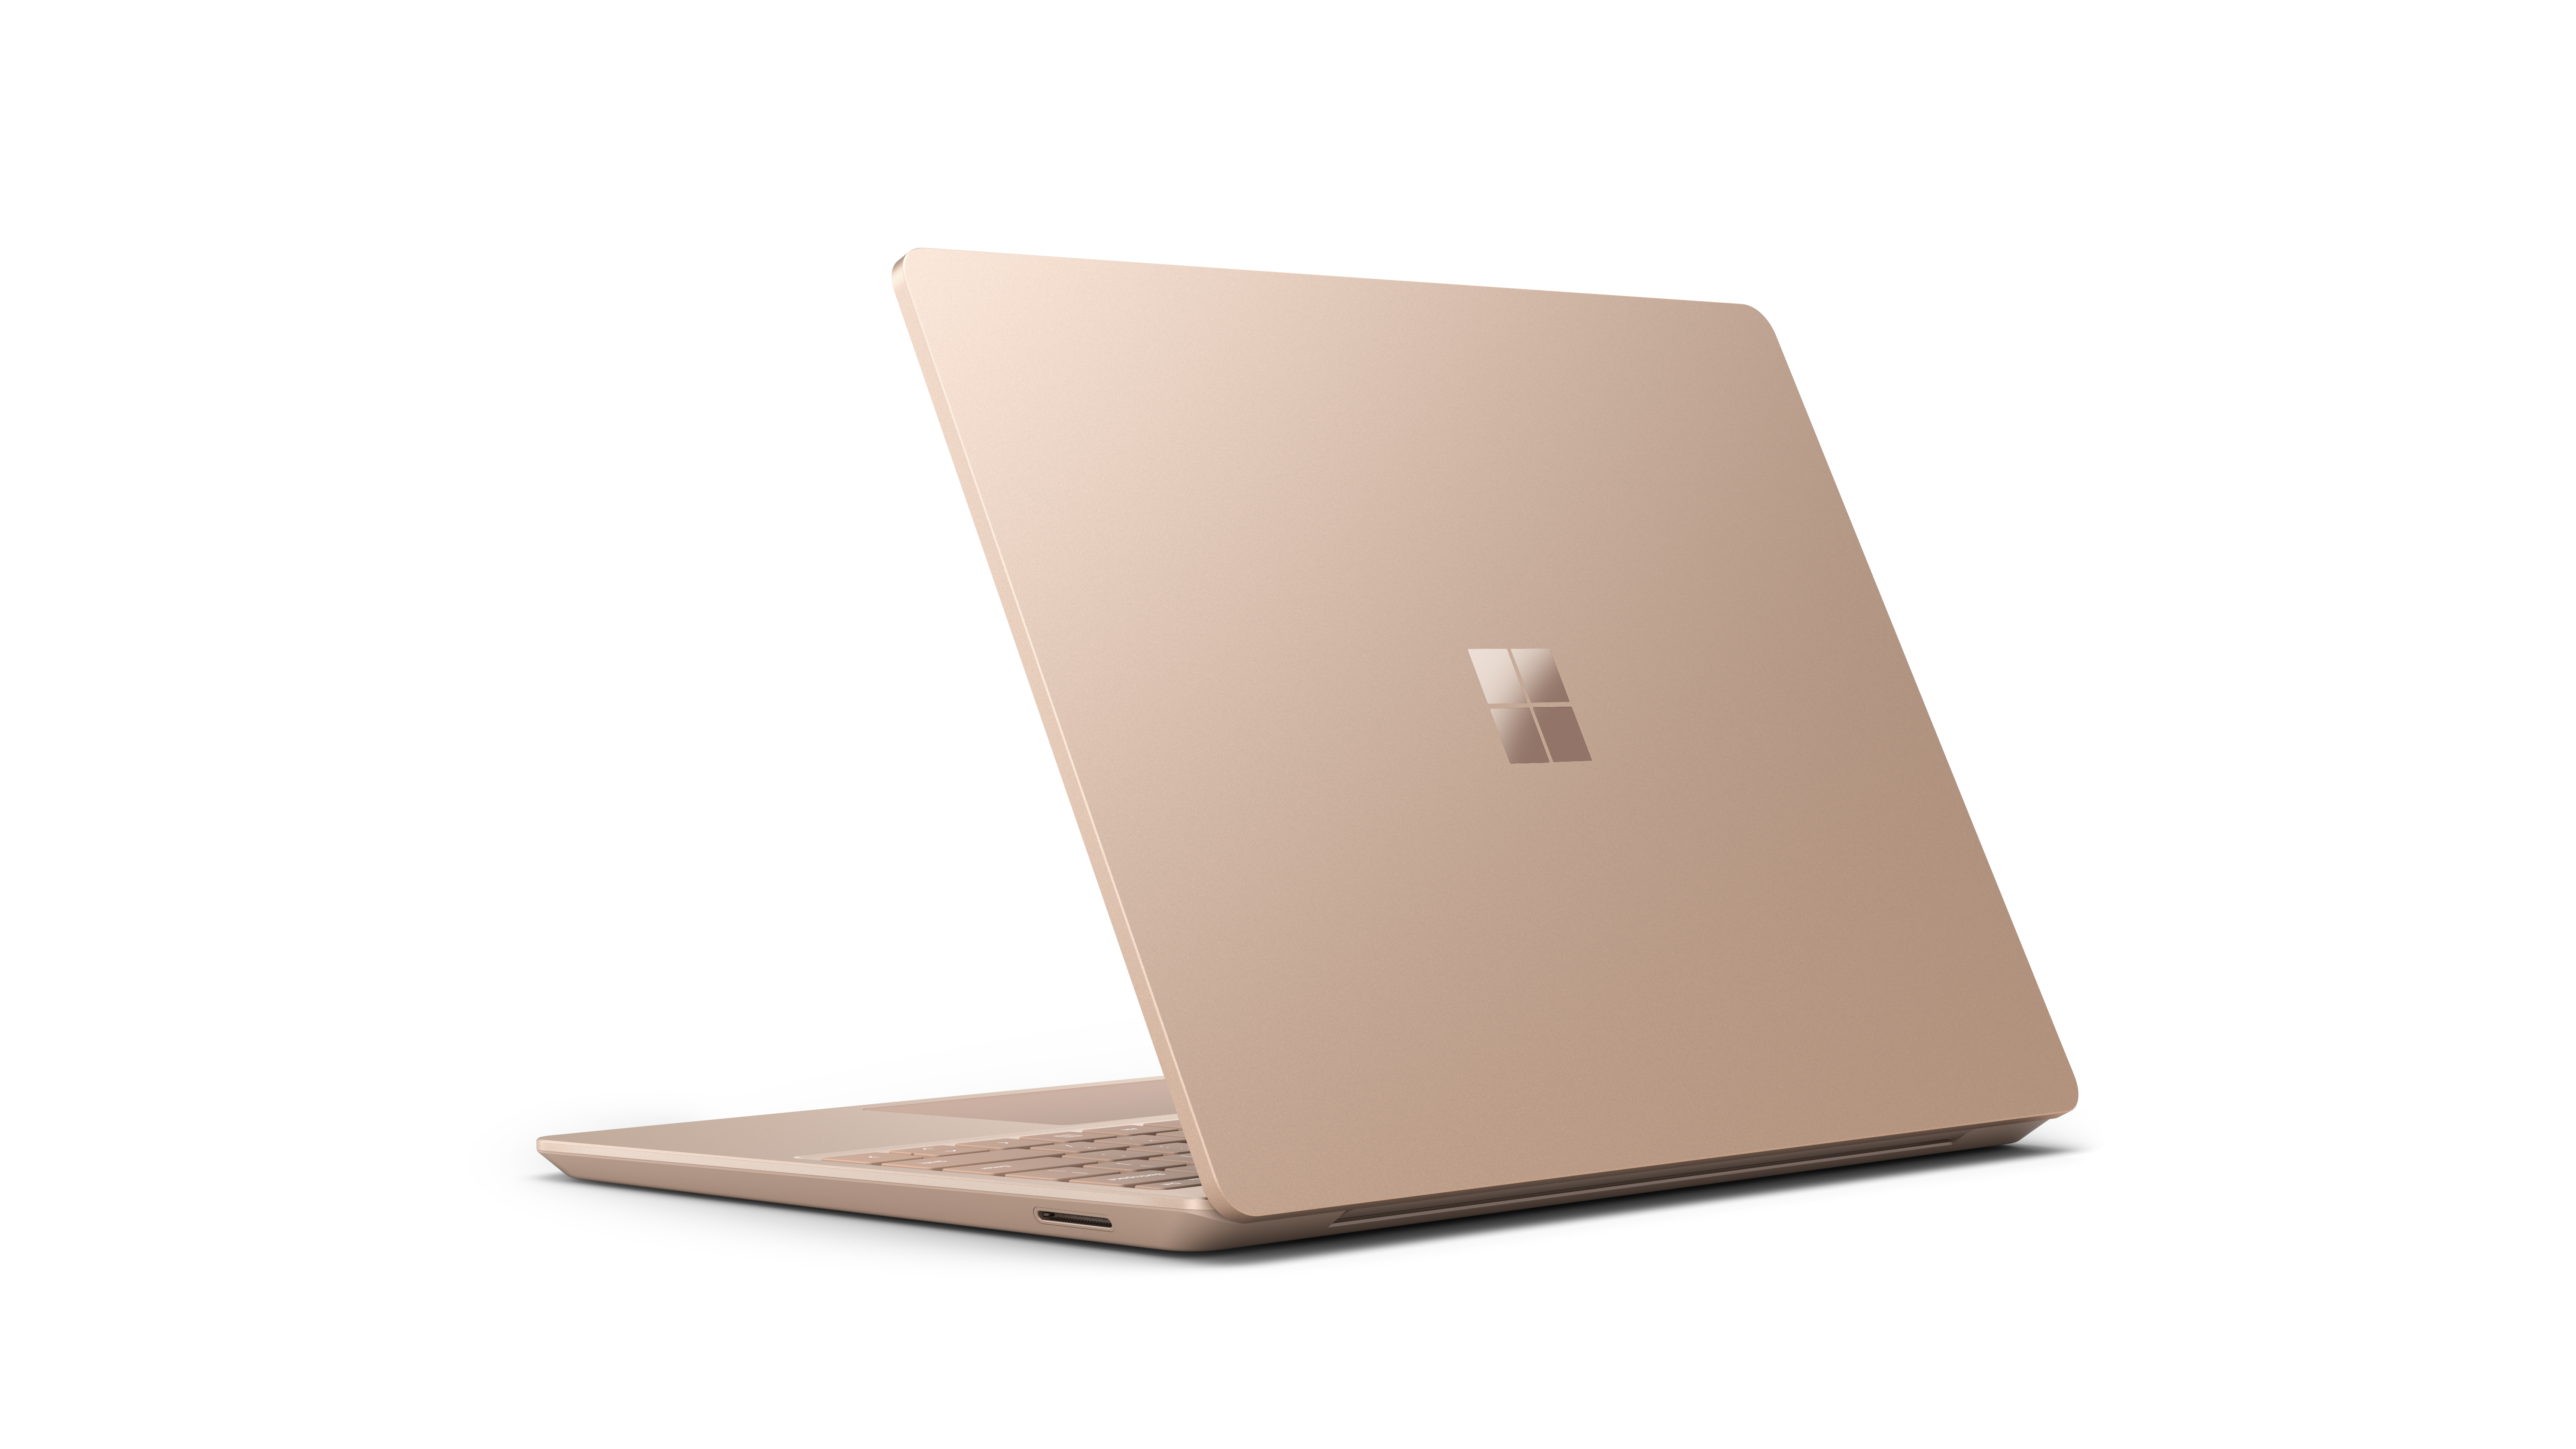 Microsoft Surface Laptop Go, 12.4" Touchscreen, Intel Core i5-1035G1, 8GB Memory, 128GB SSD, Sandstone, THH-00035 - image 5 of 6